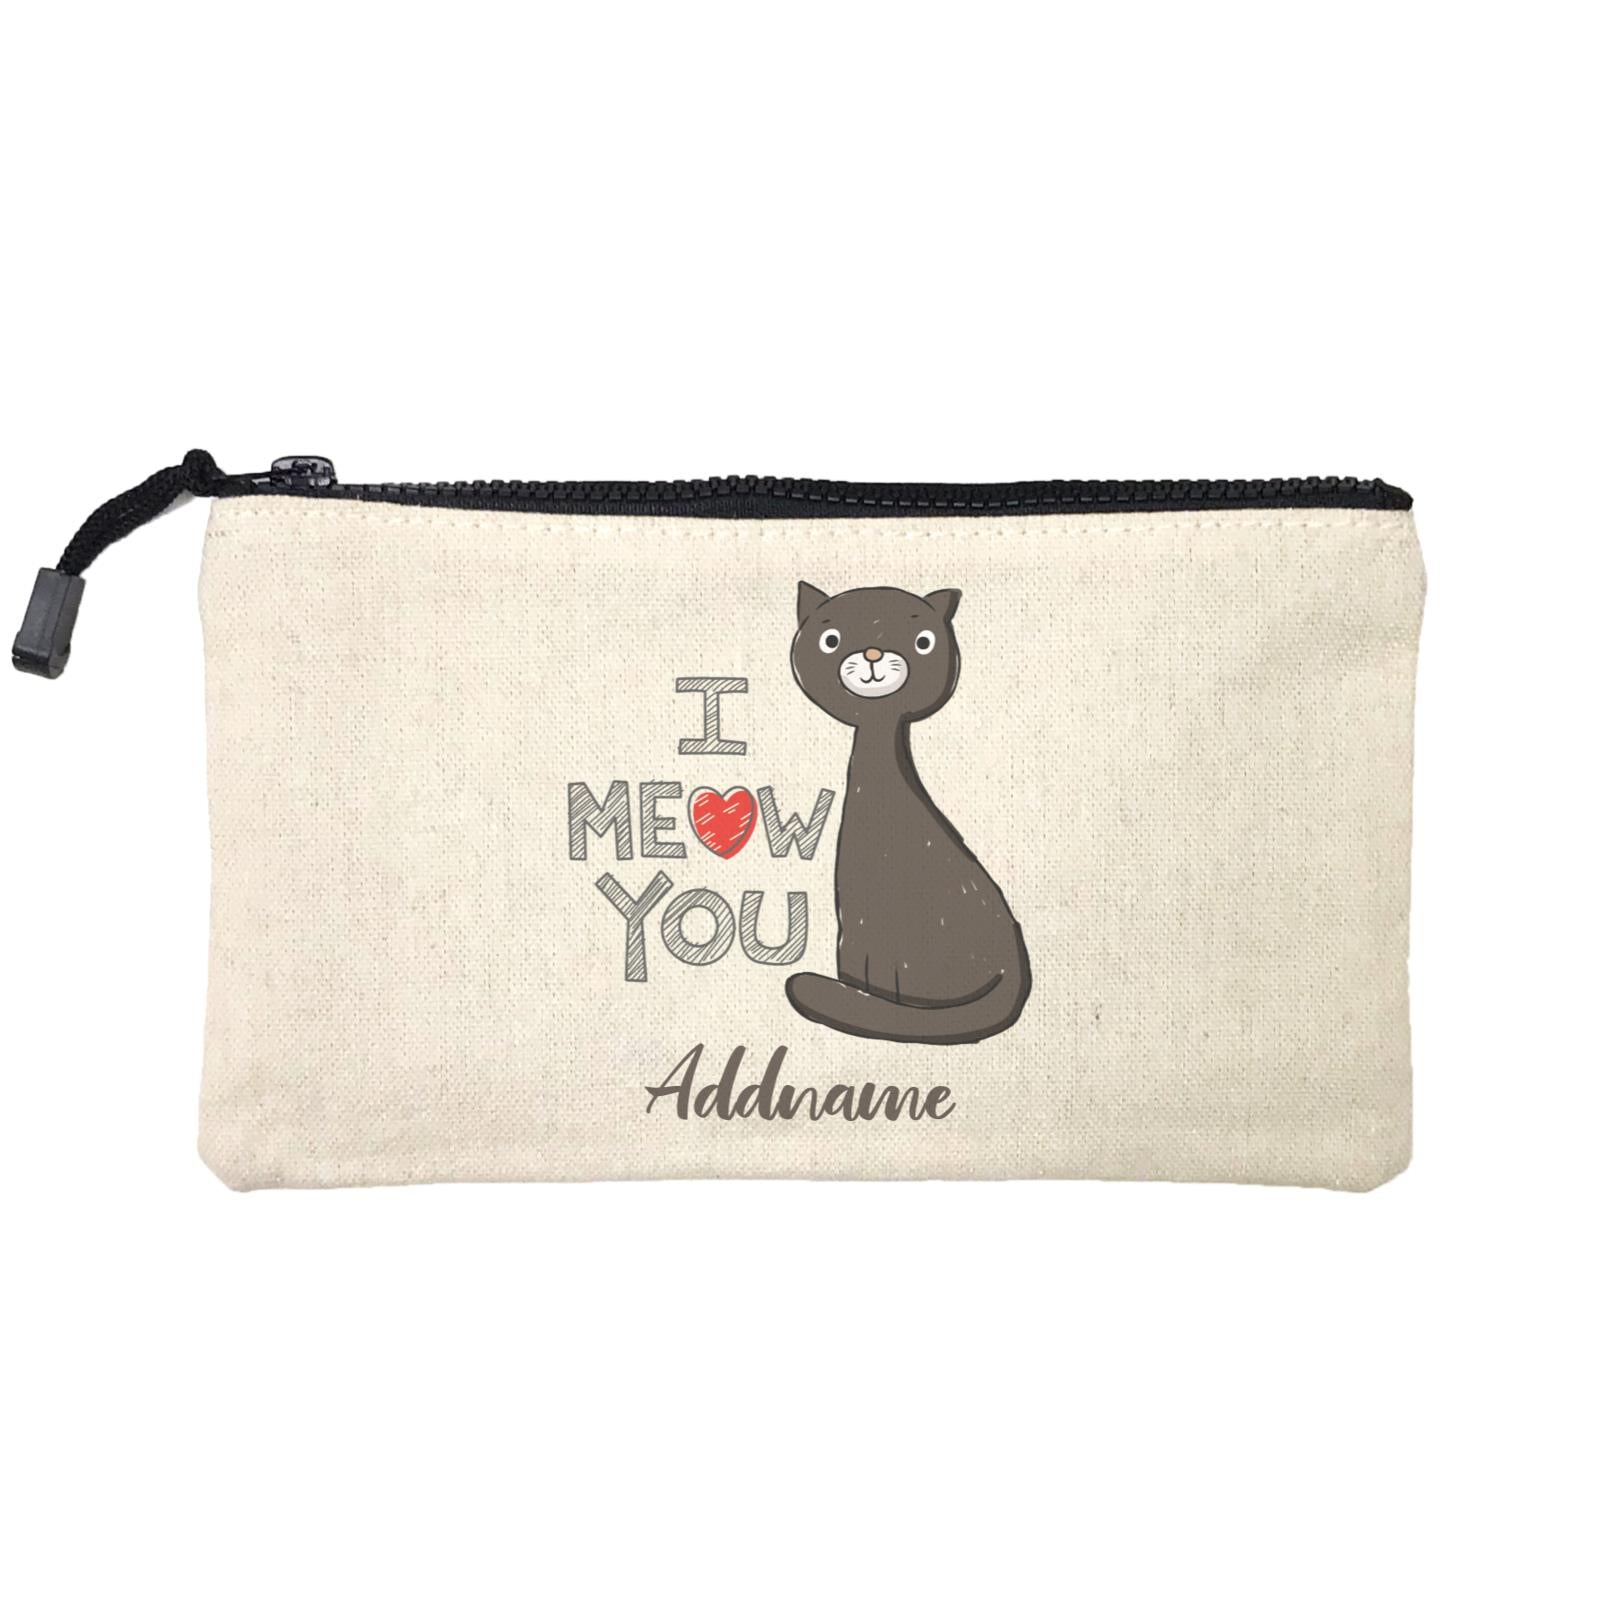 Cool Cute Animals Cats I Meow You Addname Mini Accessories Stationery Pouch